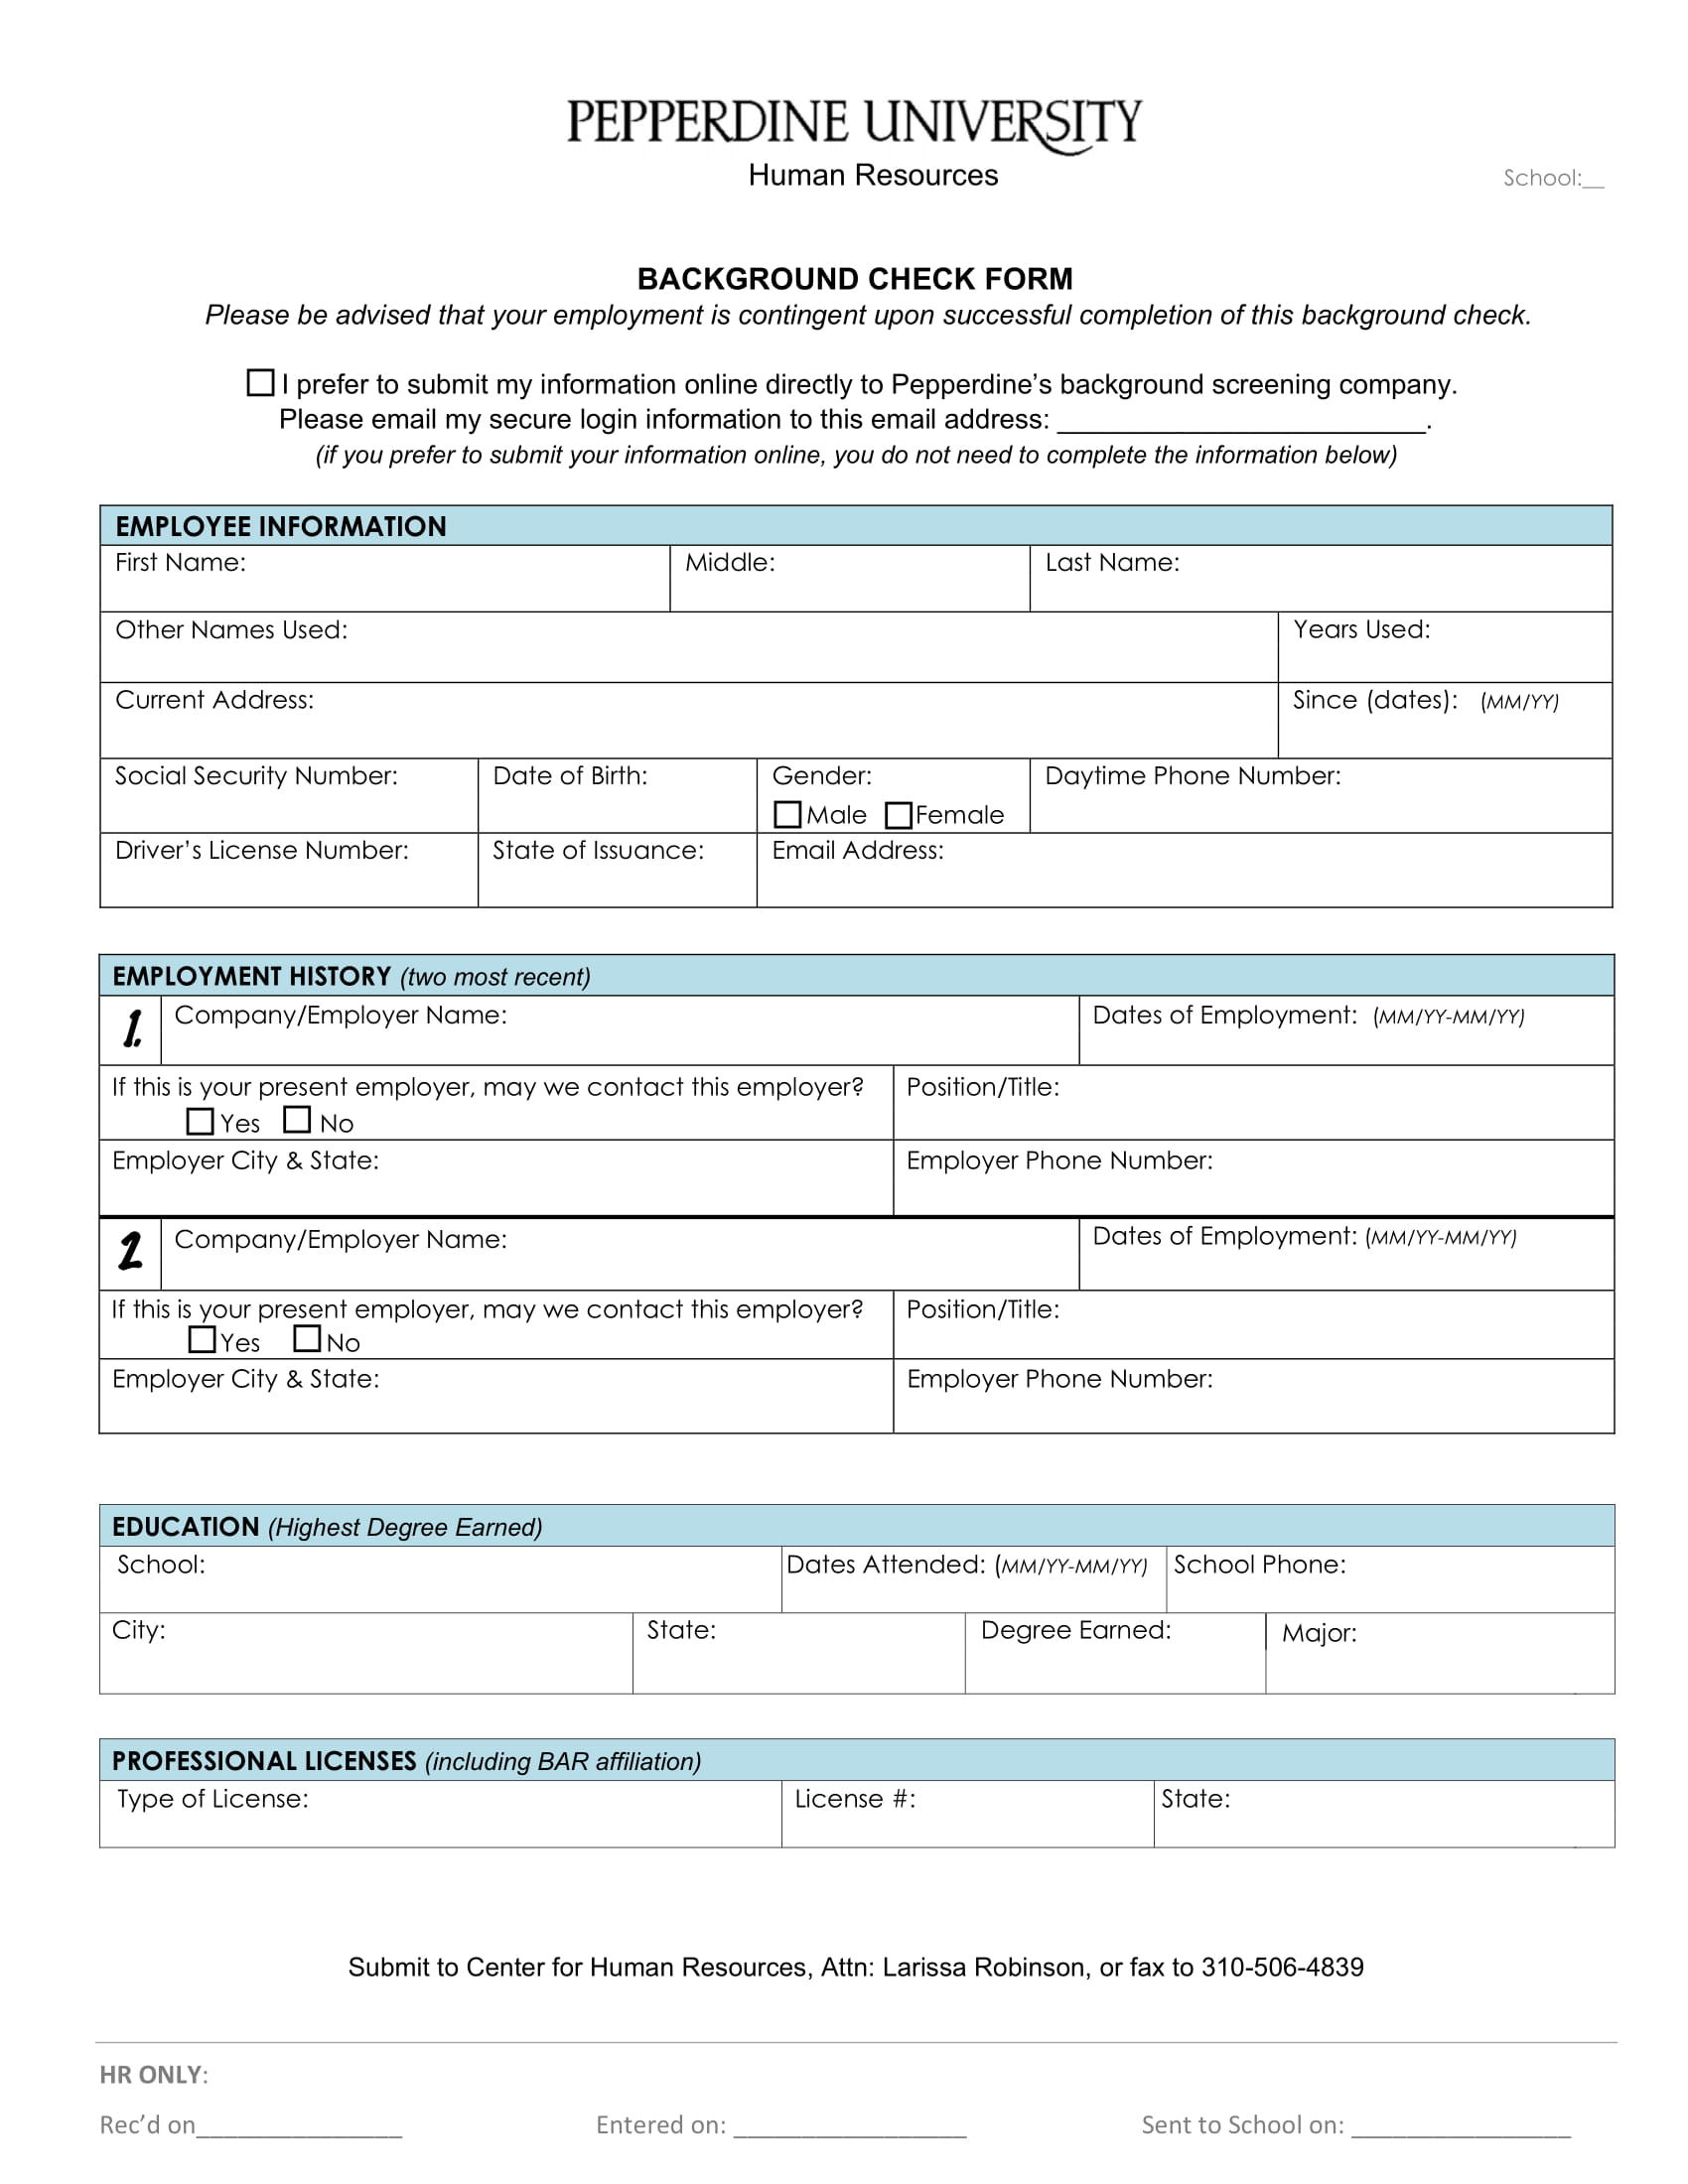 background check form example